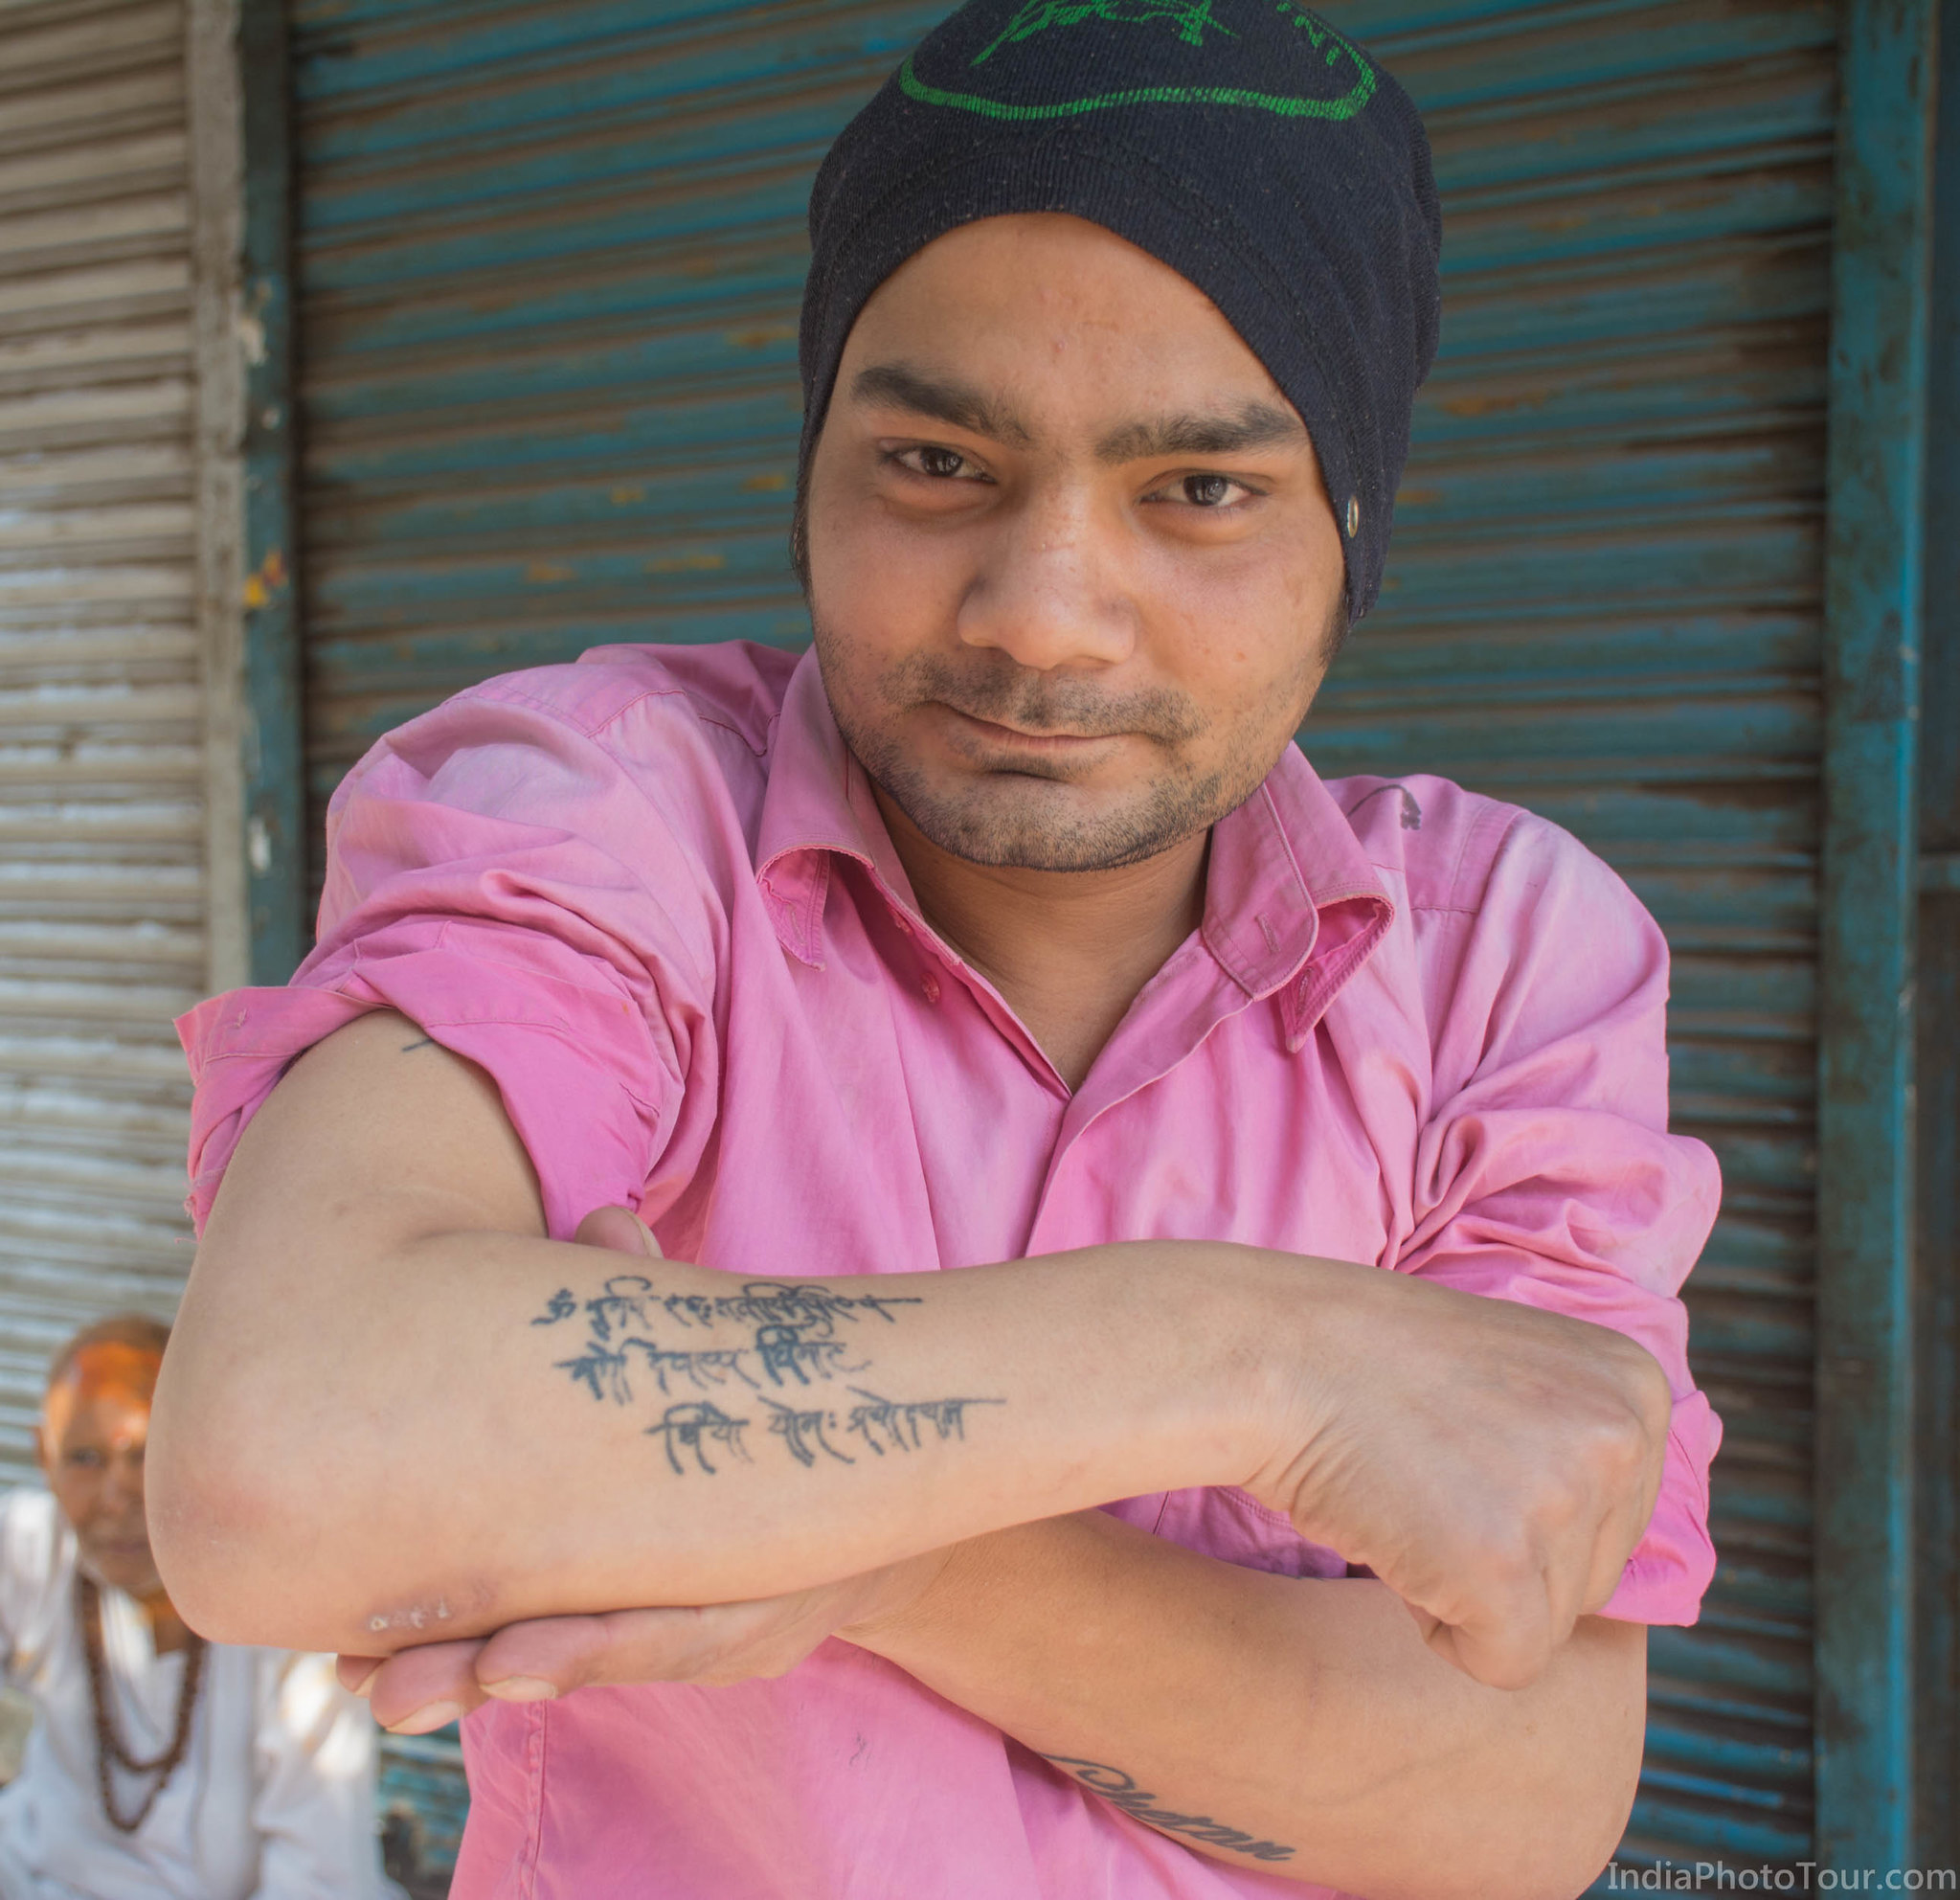 A local man showing off his tattoos